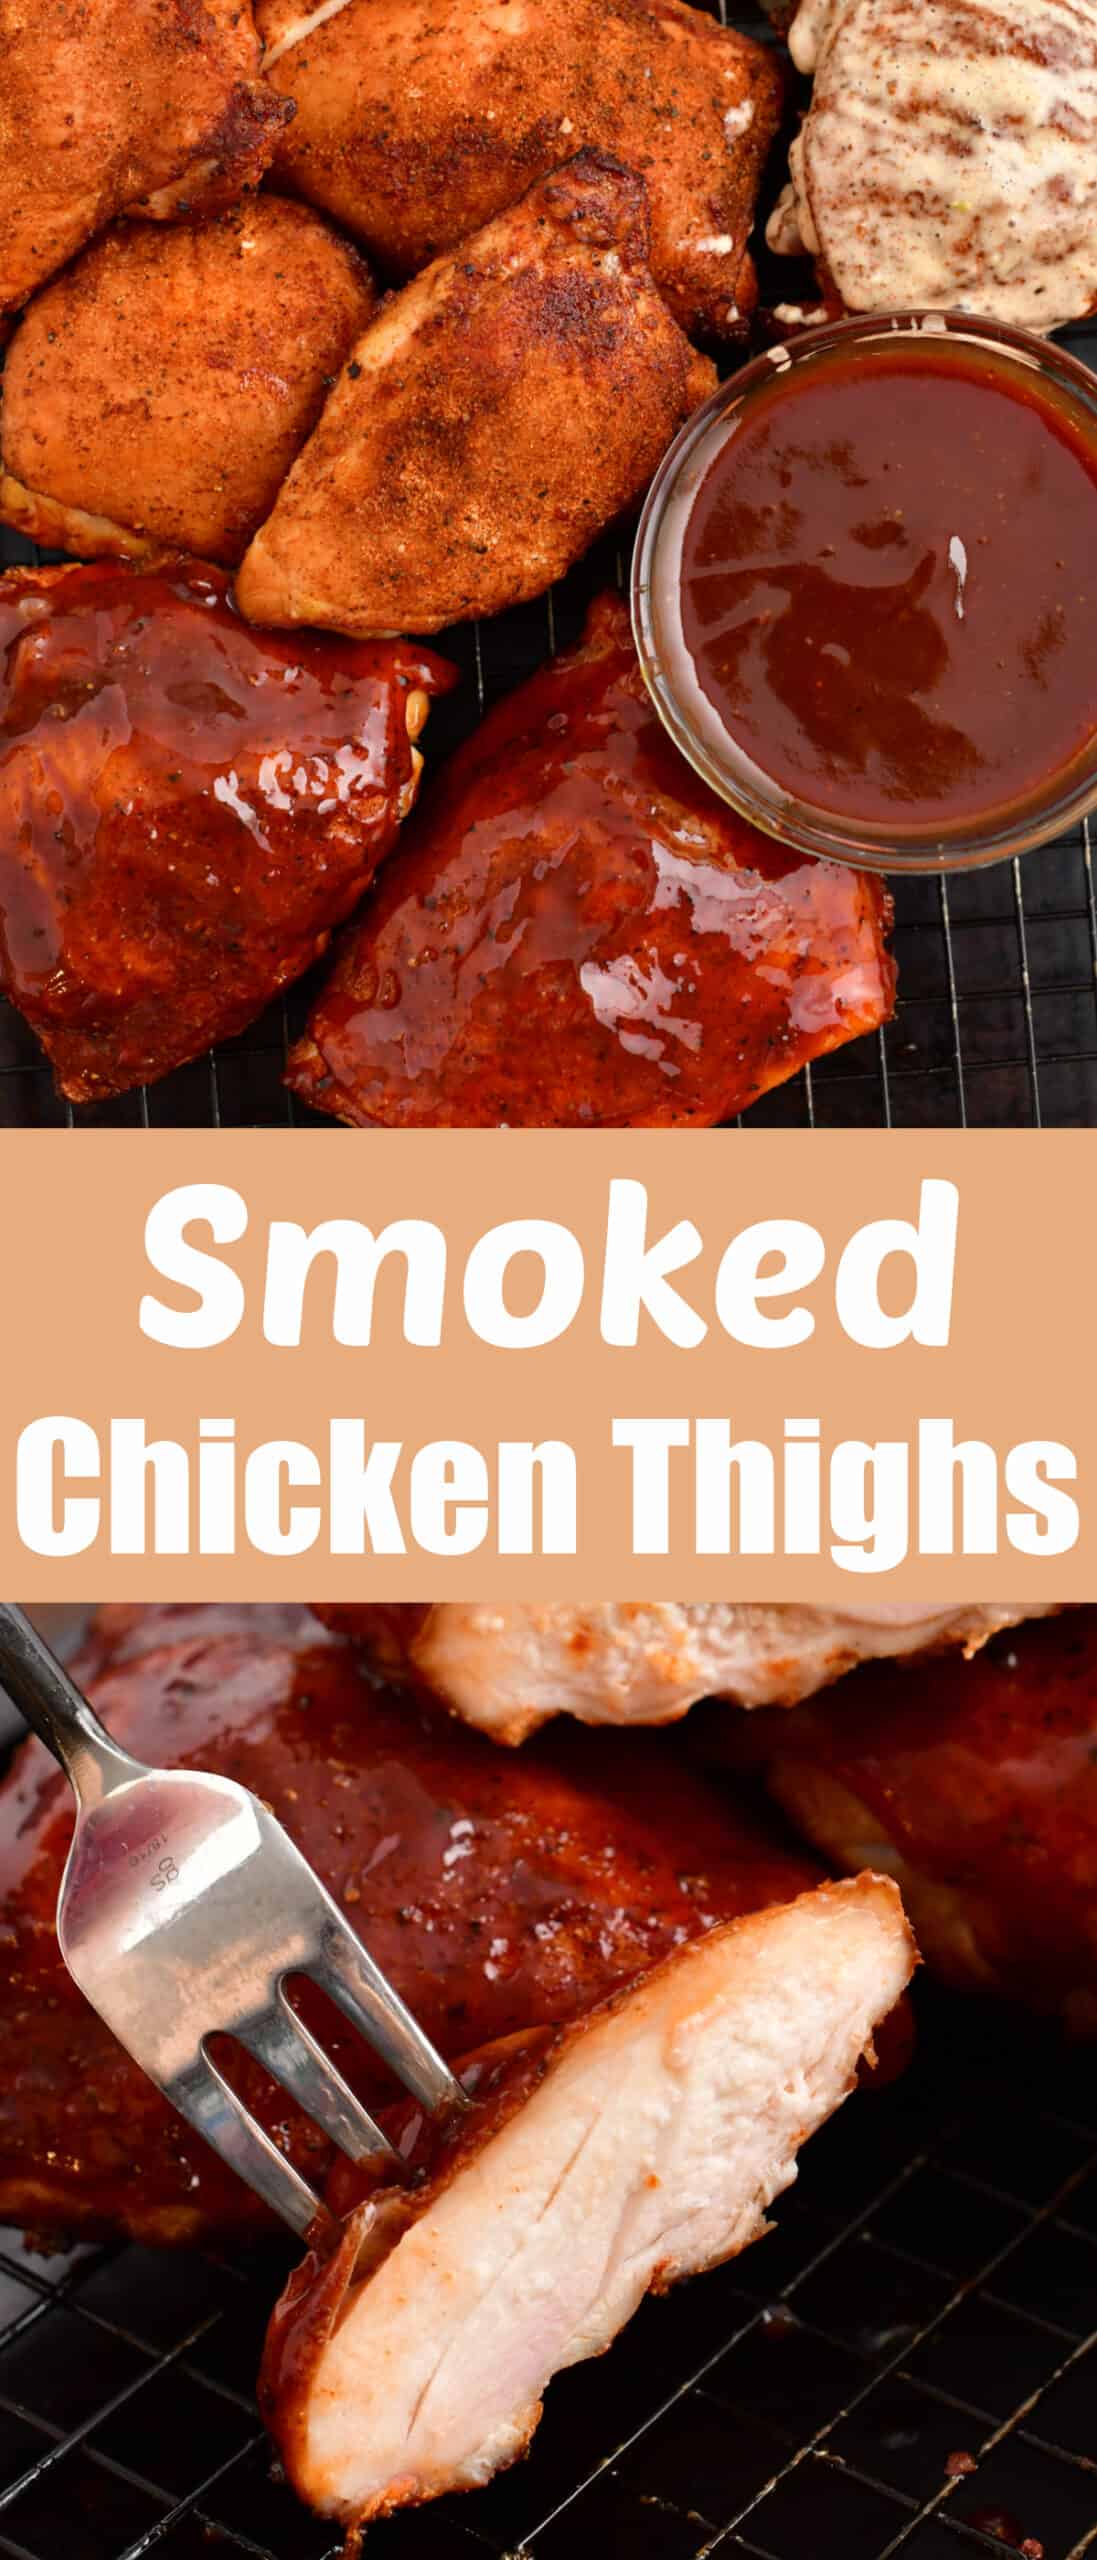 title collage of smoked chicken thighs with BBQ sauce on top and a piece cut through